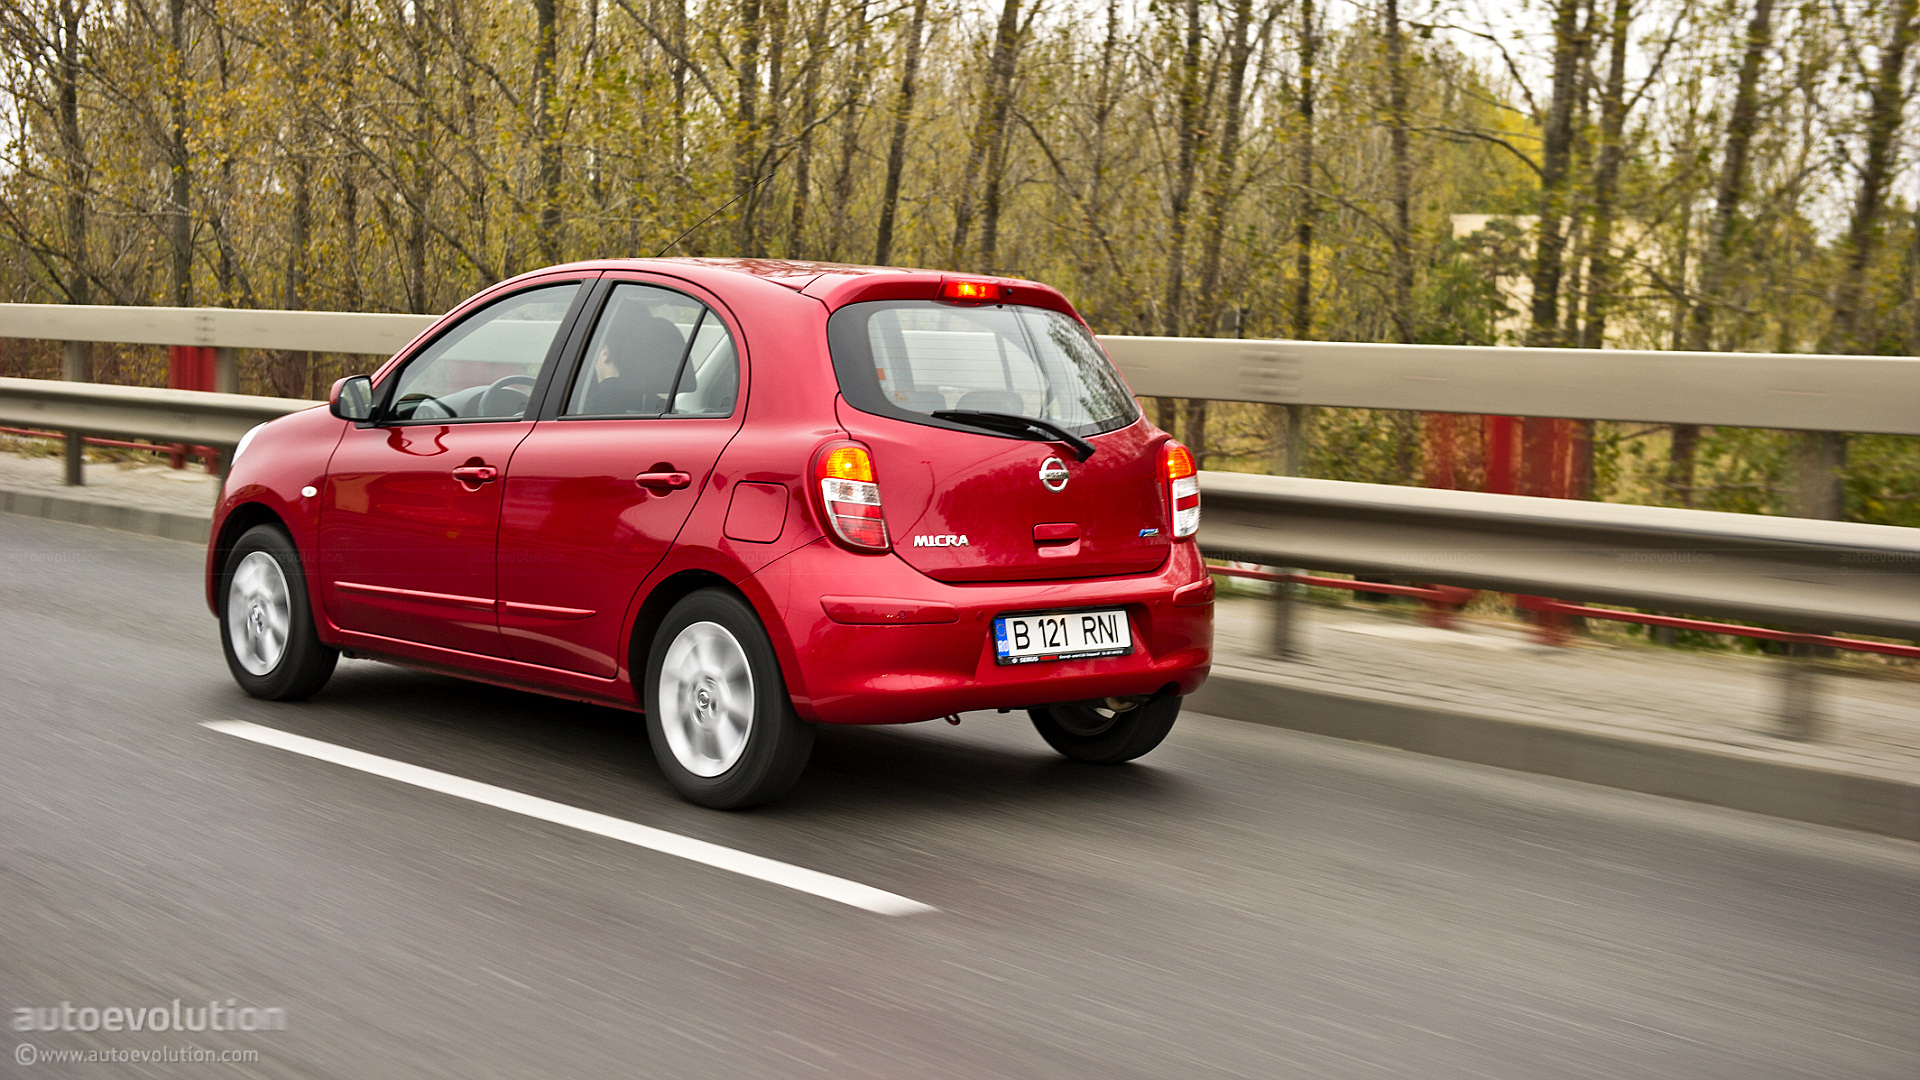 2011 Nissan micra safety rating #9